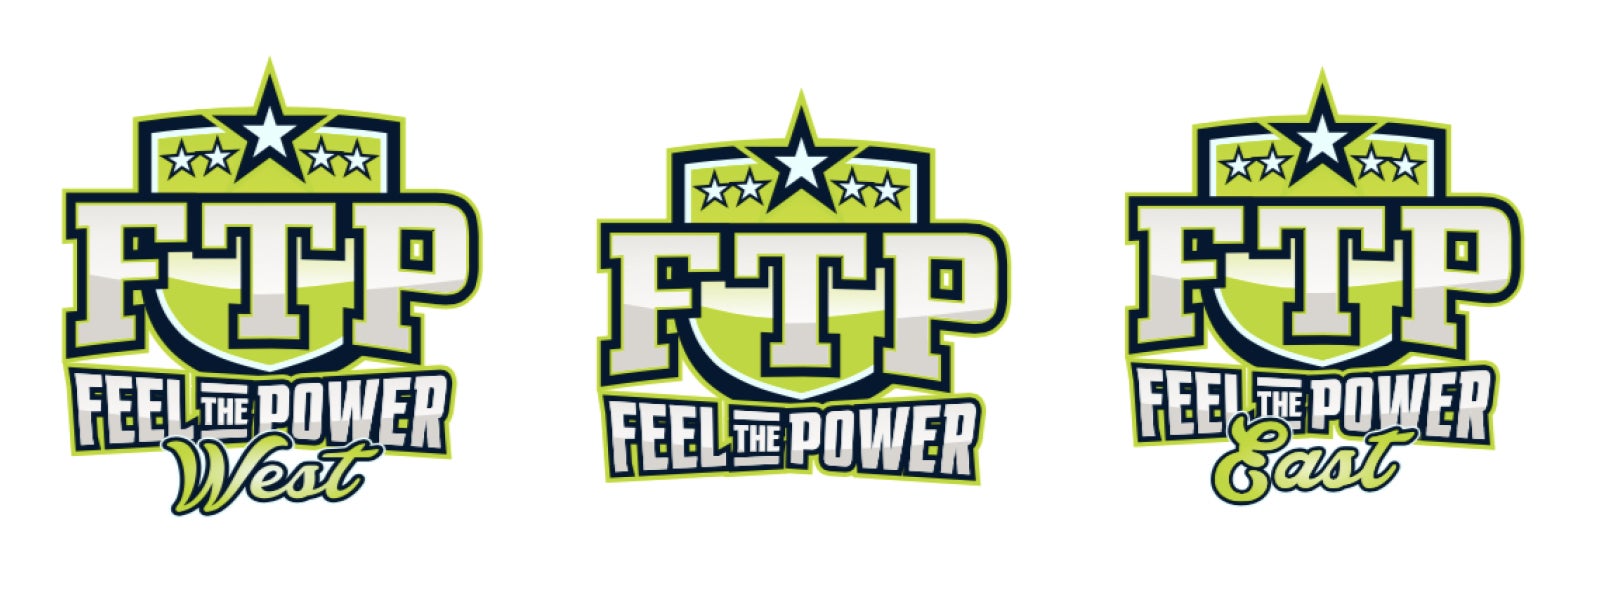 Feel the Power West Cheerleading Competition